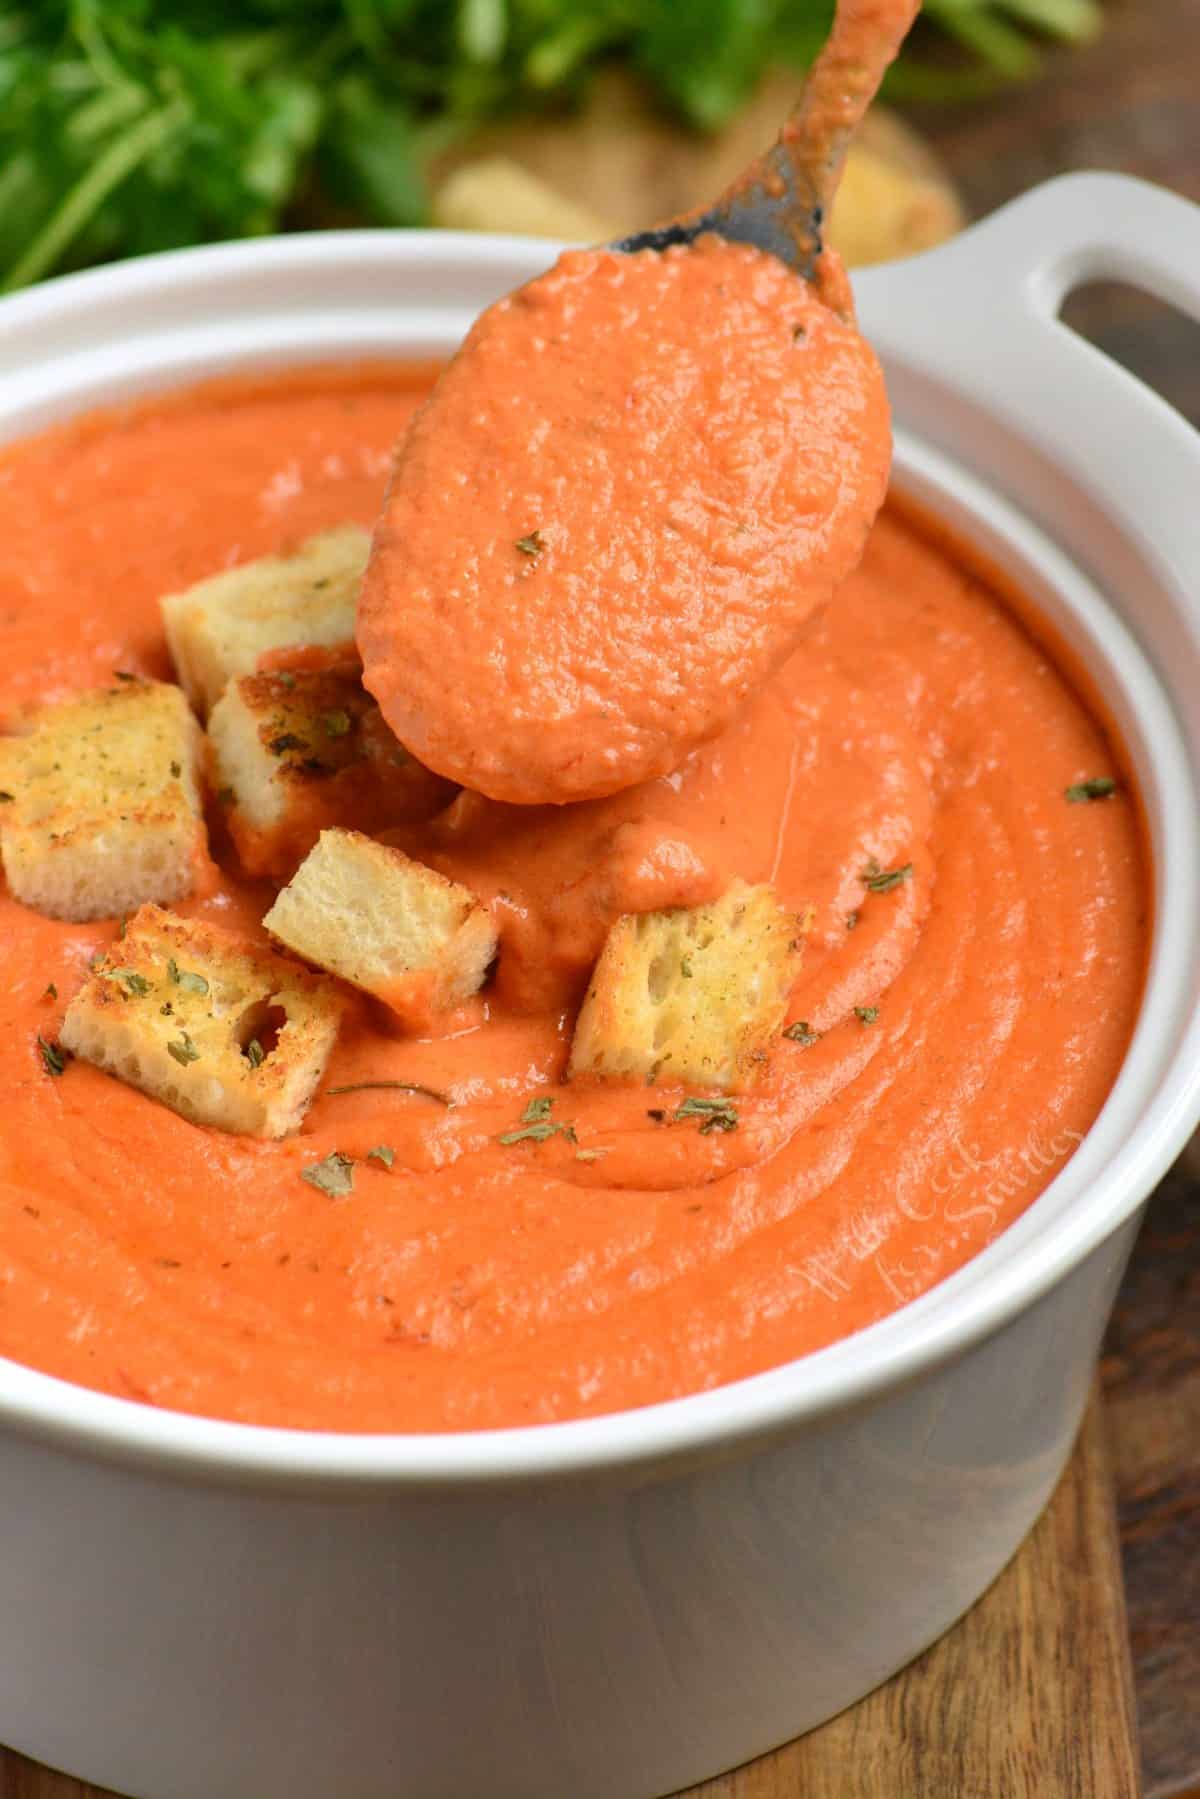 tomato soup in a bowl with croutons on top and a spoon scooping some of the soup.